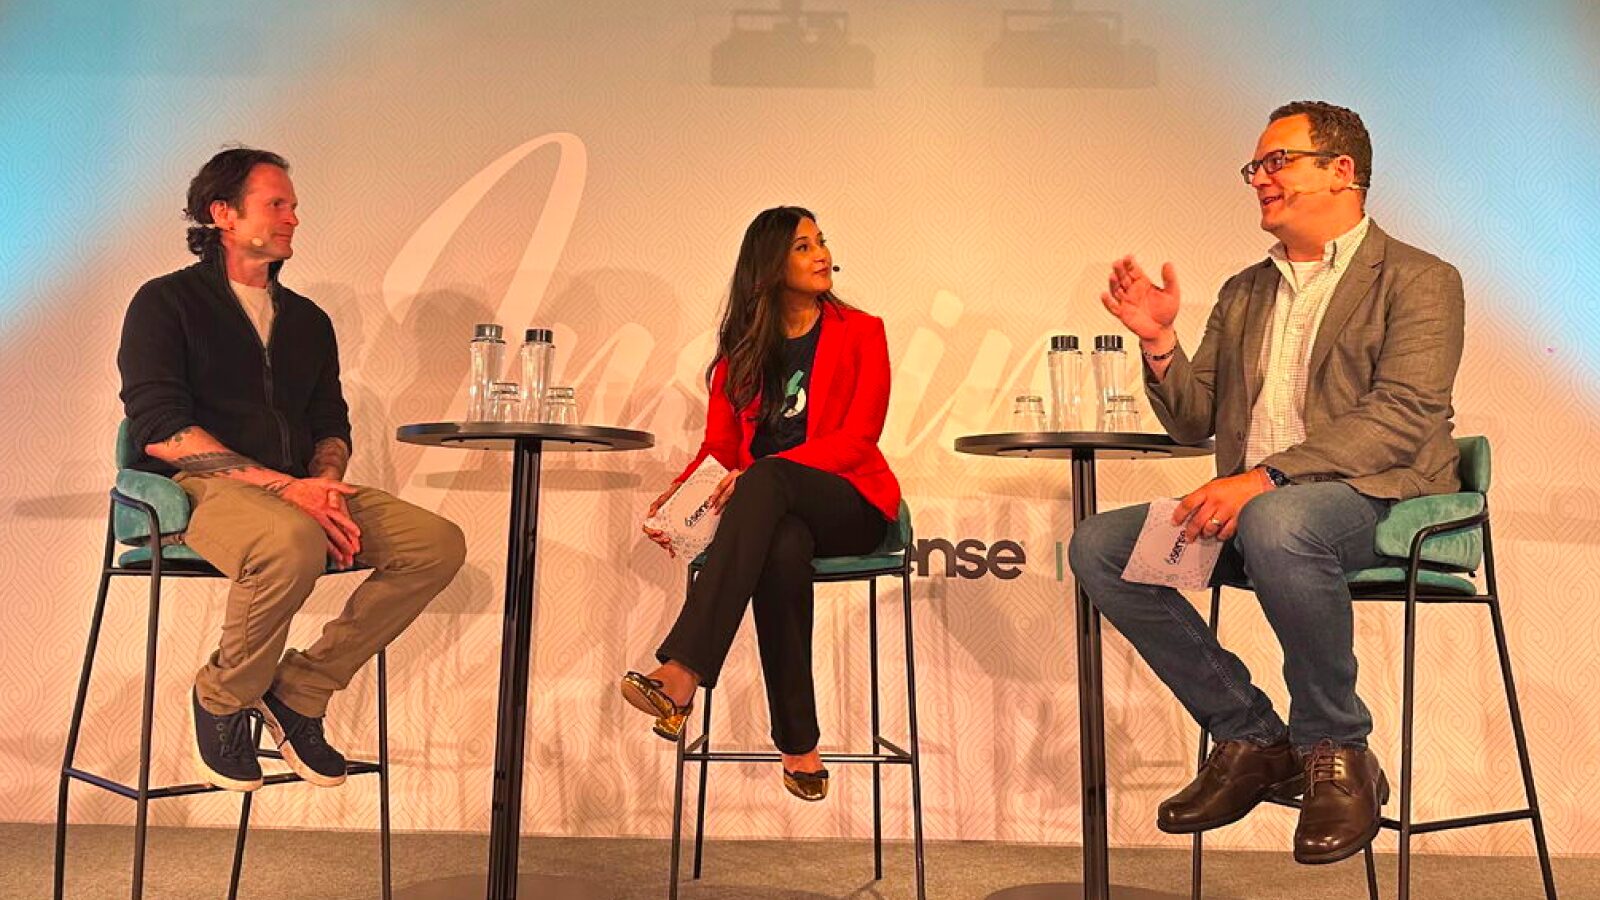 Aaron Ross, Saima Rashid, and Adam Kaiser host a live Revenue Makers podcast from the Inspire UK stage.